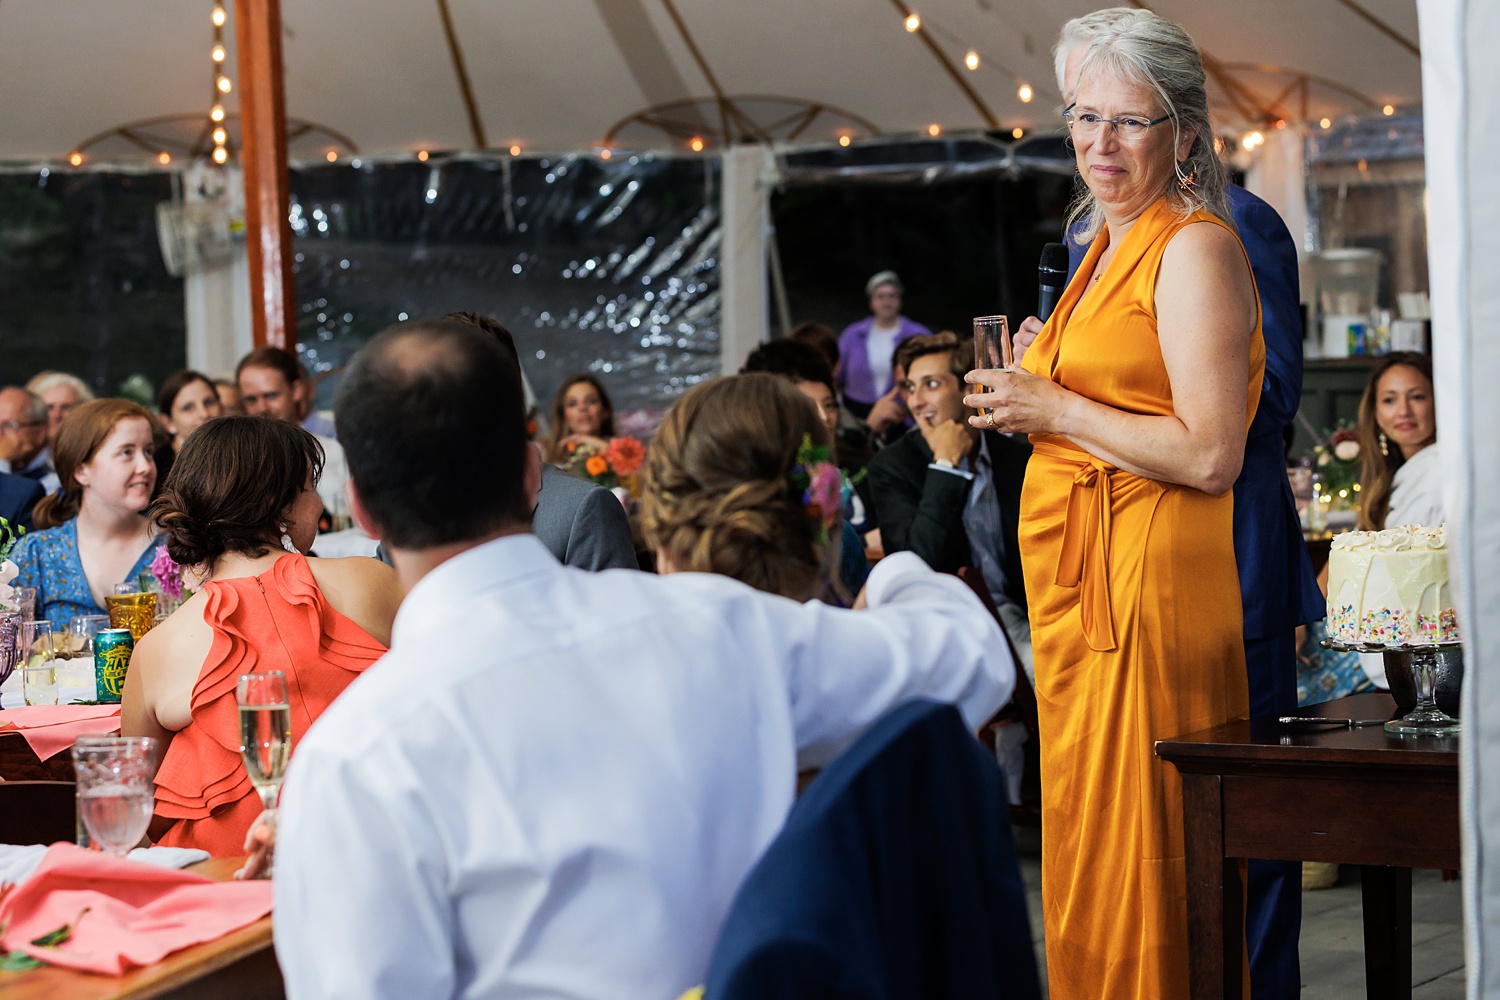 Bride's mom gives a loving look at the couple during toasts